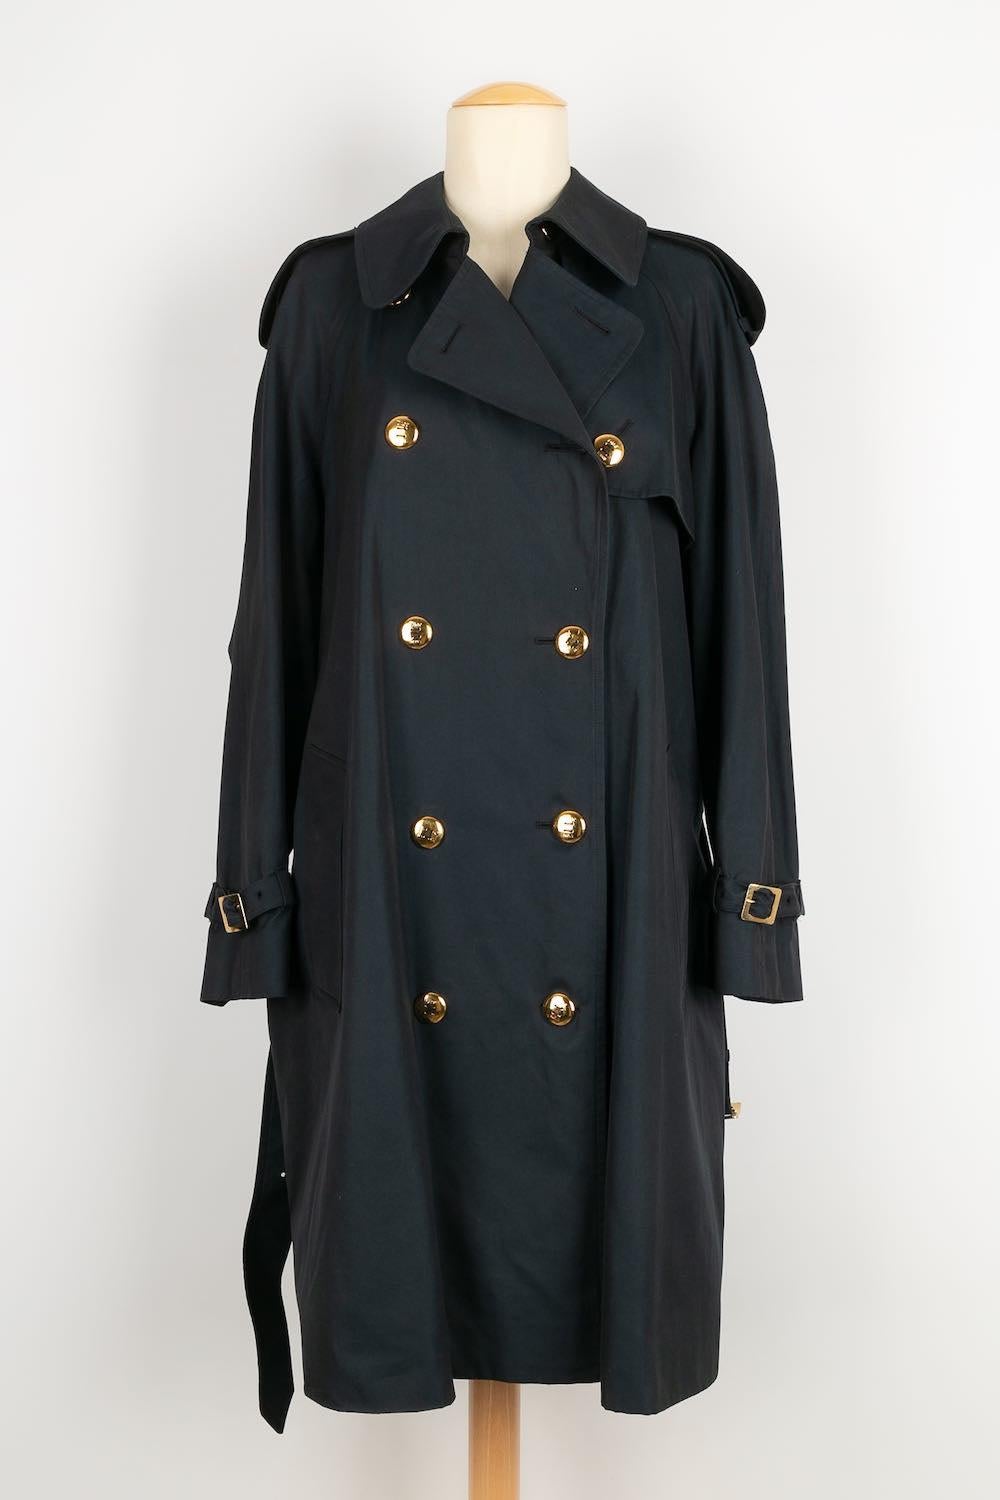 Dior -Long trench coat in navy blue cotton and gold metal buttons. No size indicated, it corresponds to a 38/40FR.

Additional information: 
Dimensions: Shoulder width: 47 cm, Sleeve length: 60 cm, Length: 100 cm
Condition: Very good